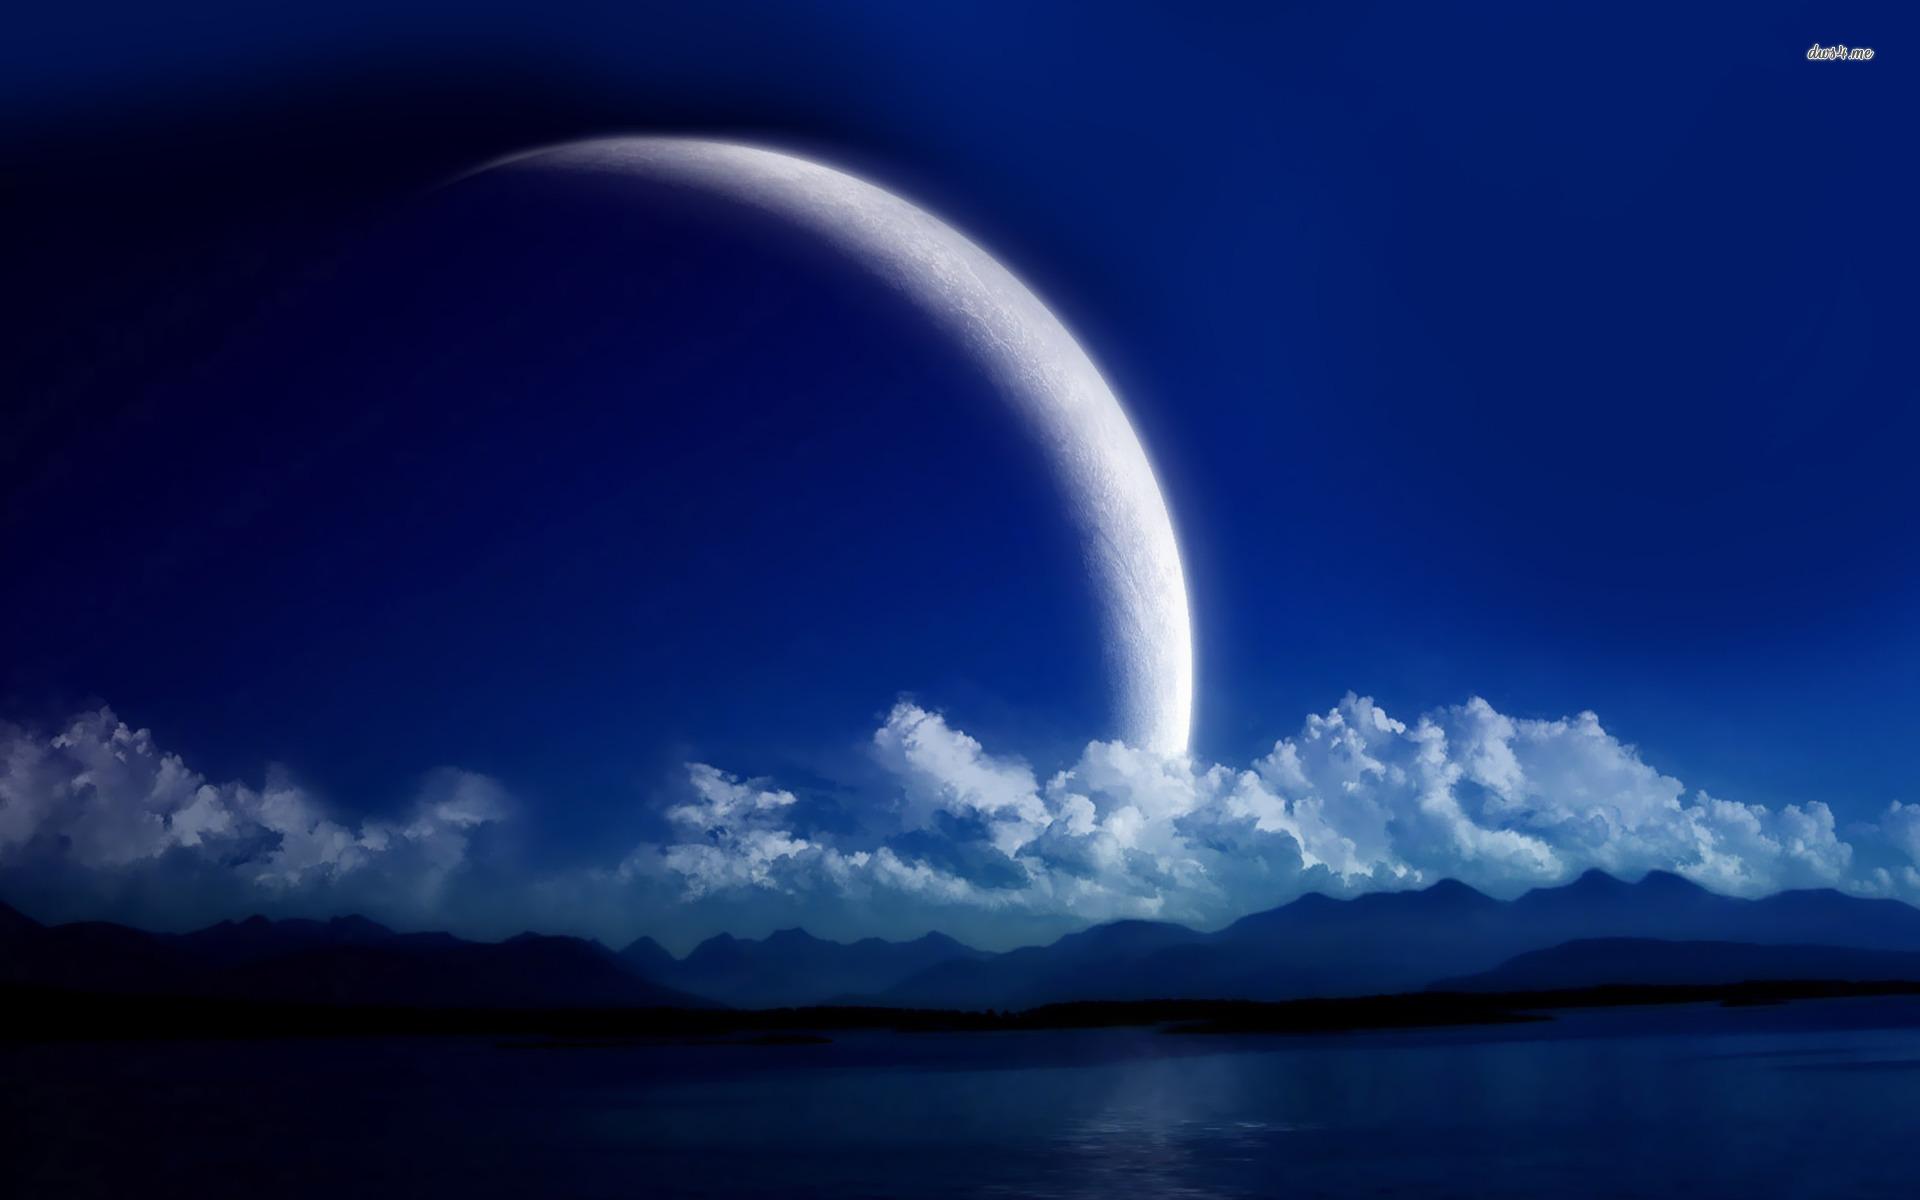 Crescent moon over clouds wallpapers